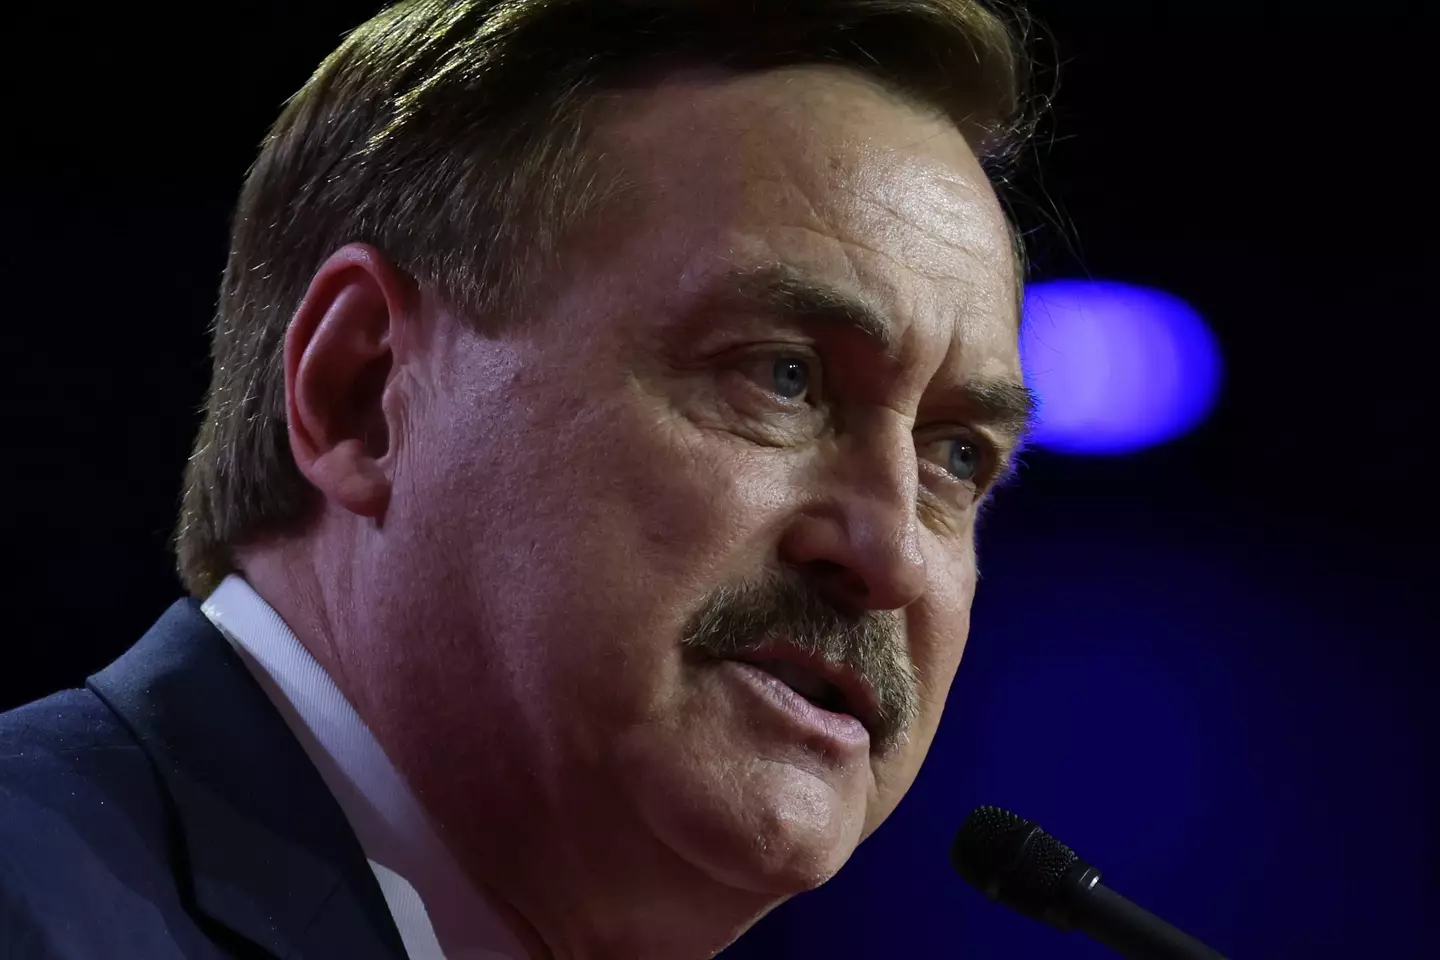 MyPillow CEO Mike Lindell has been ordered to pay the $5 million to Zeidman.